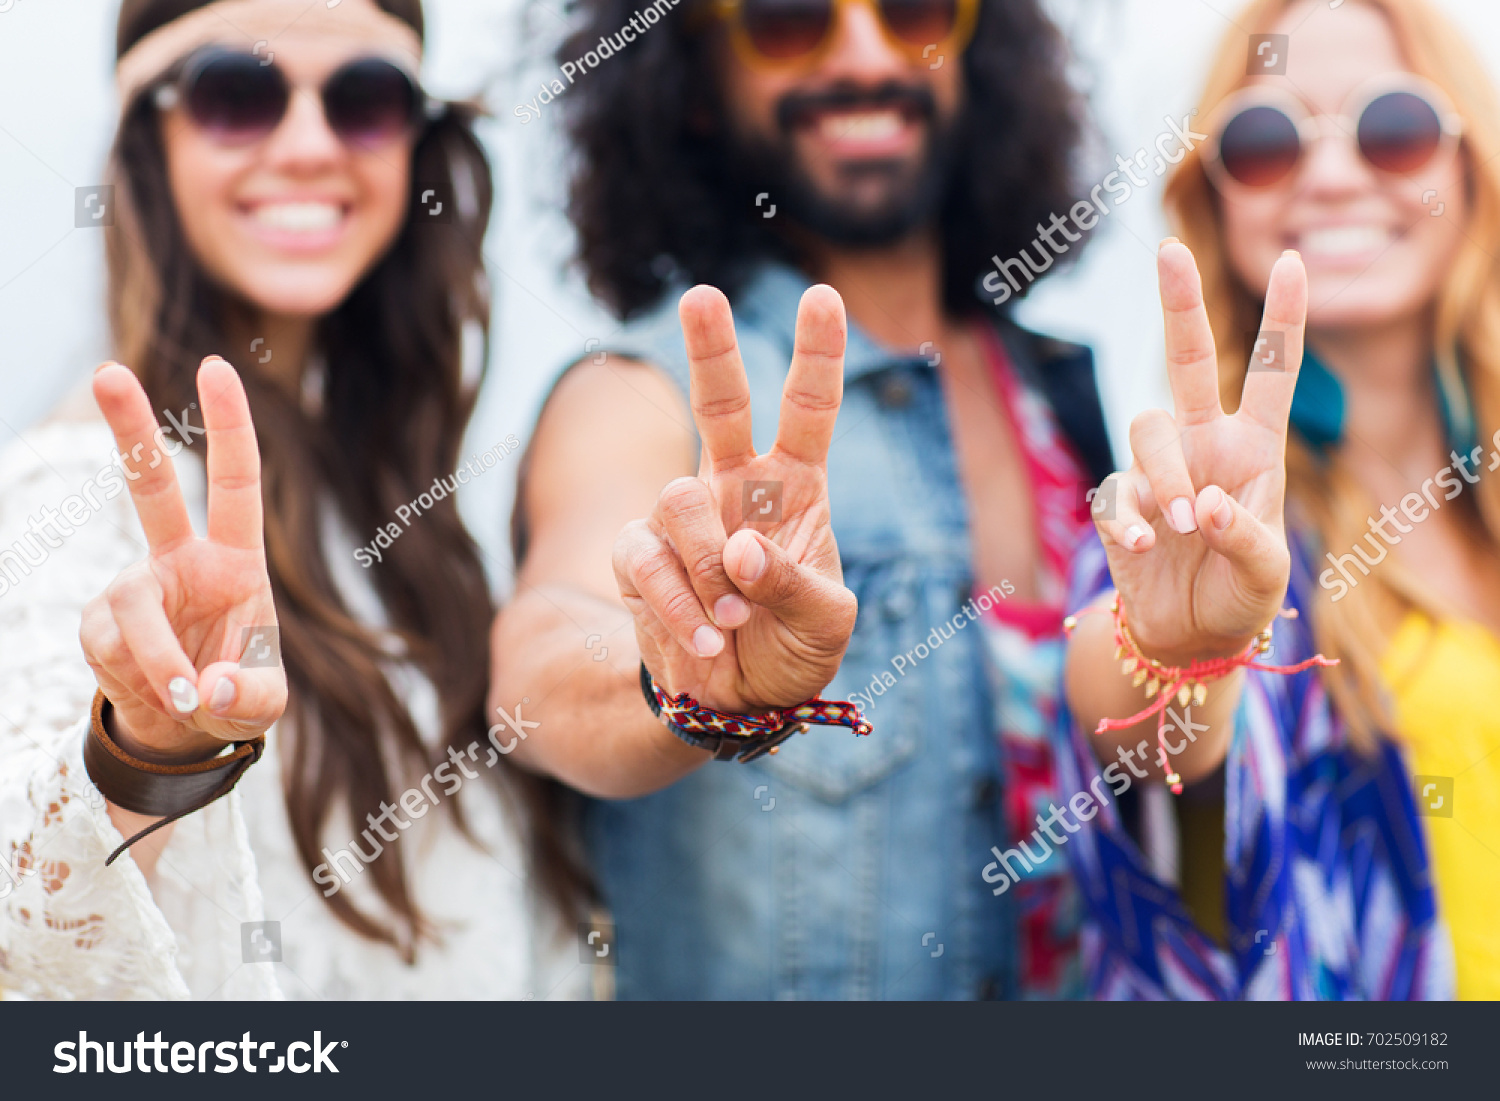 youth culture, gesture and people concept - smiling young hippie friends in sunglasses showing peace hand sign outdoors #702509182